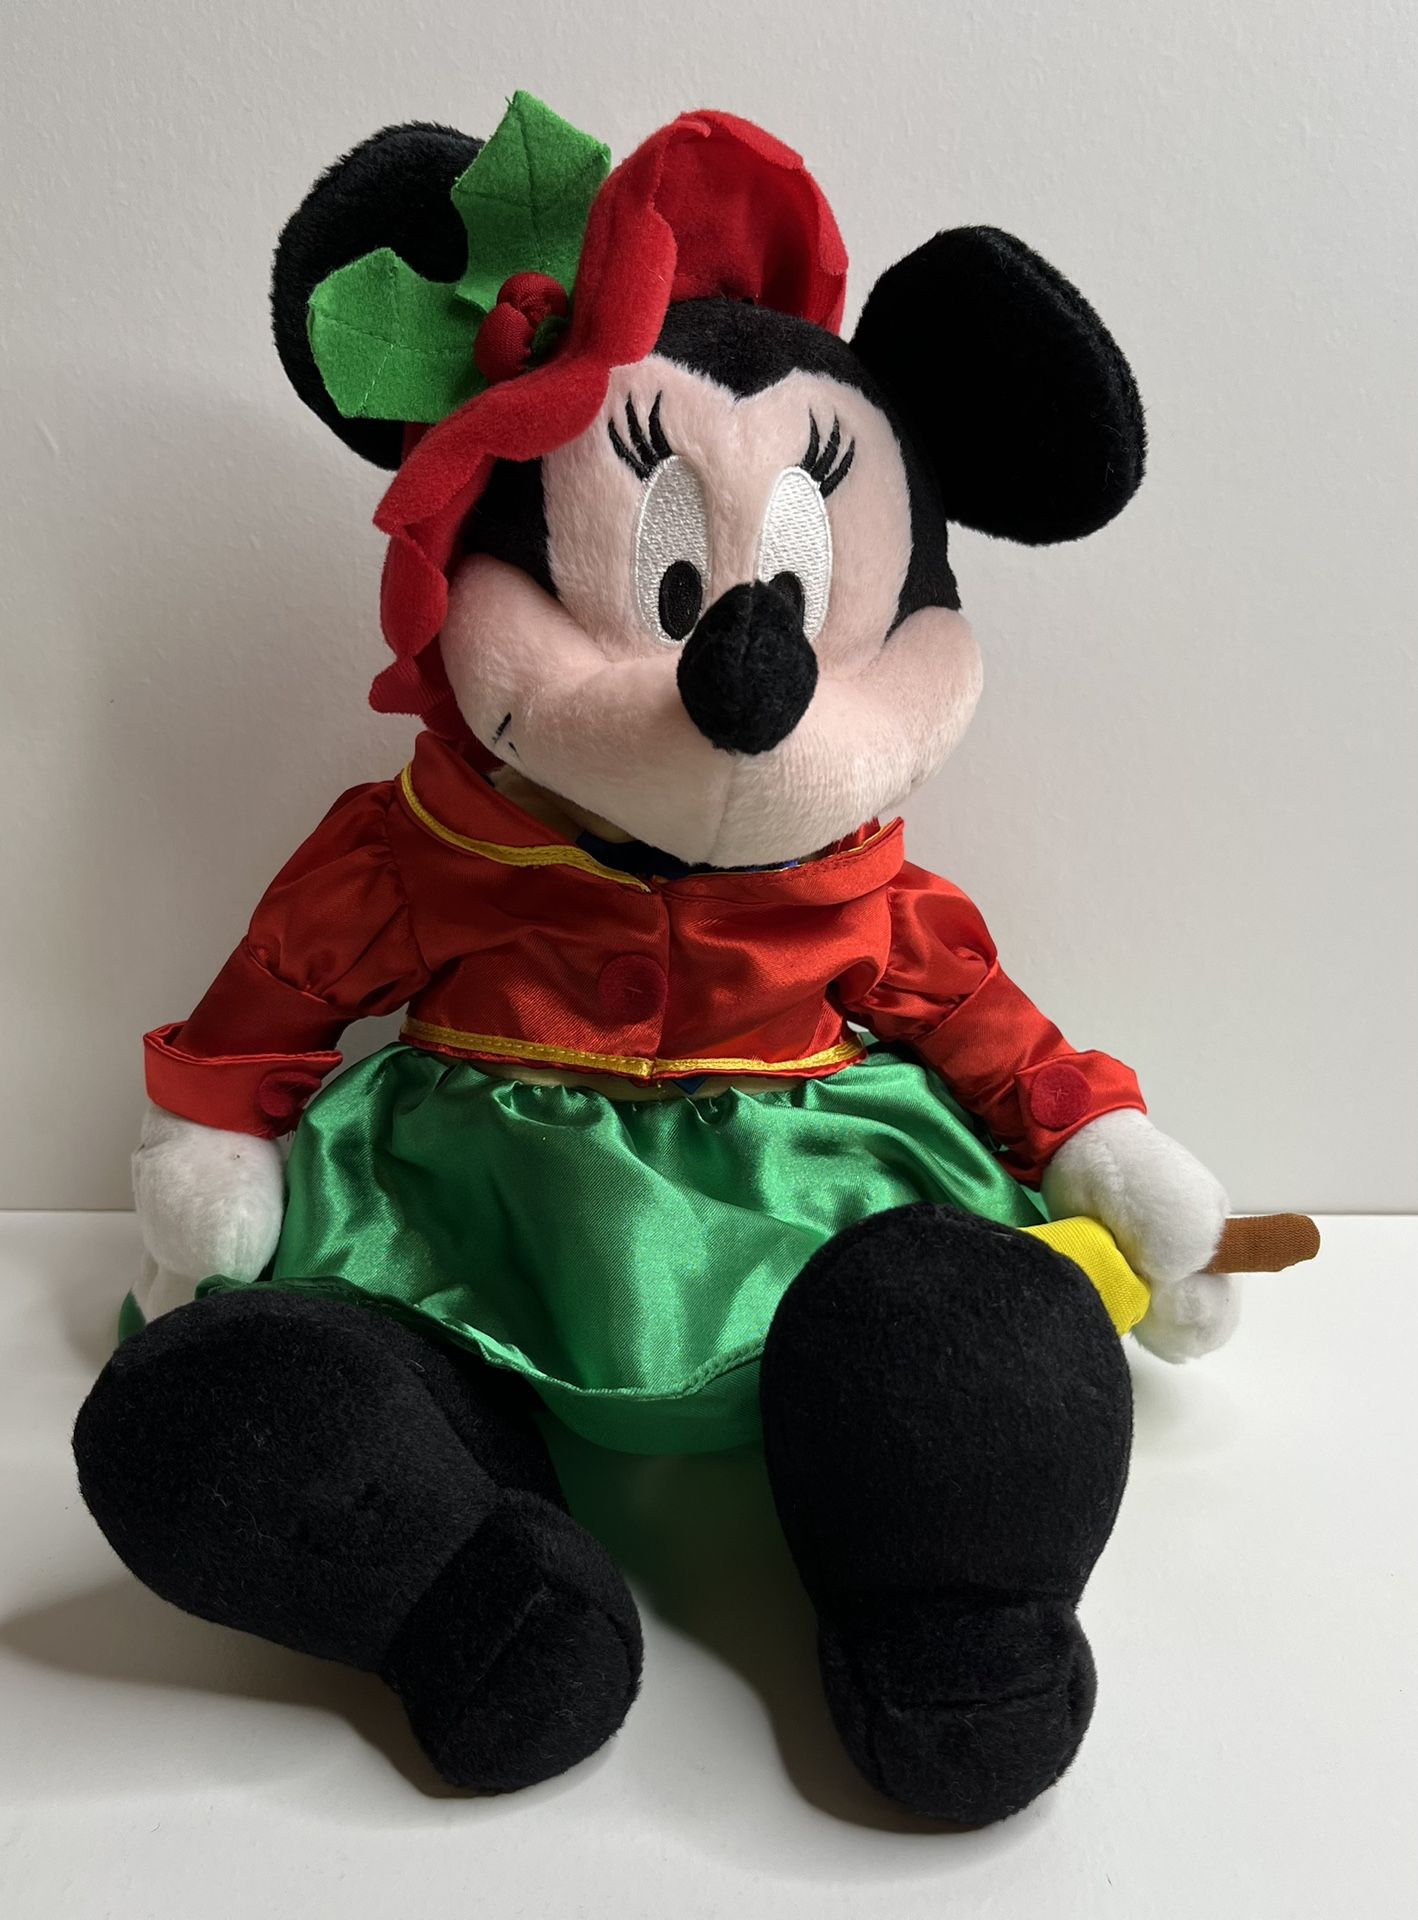 2002 Disney Store Exclusive Holiday Musical Dancer Minnie Mouse Christmas Plush